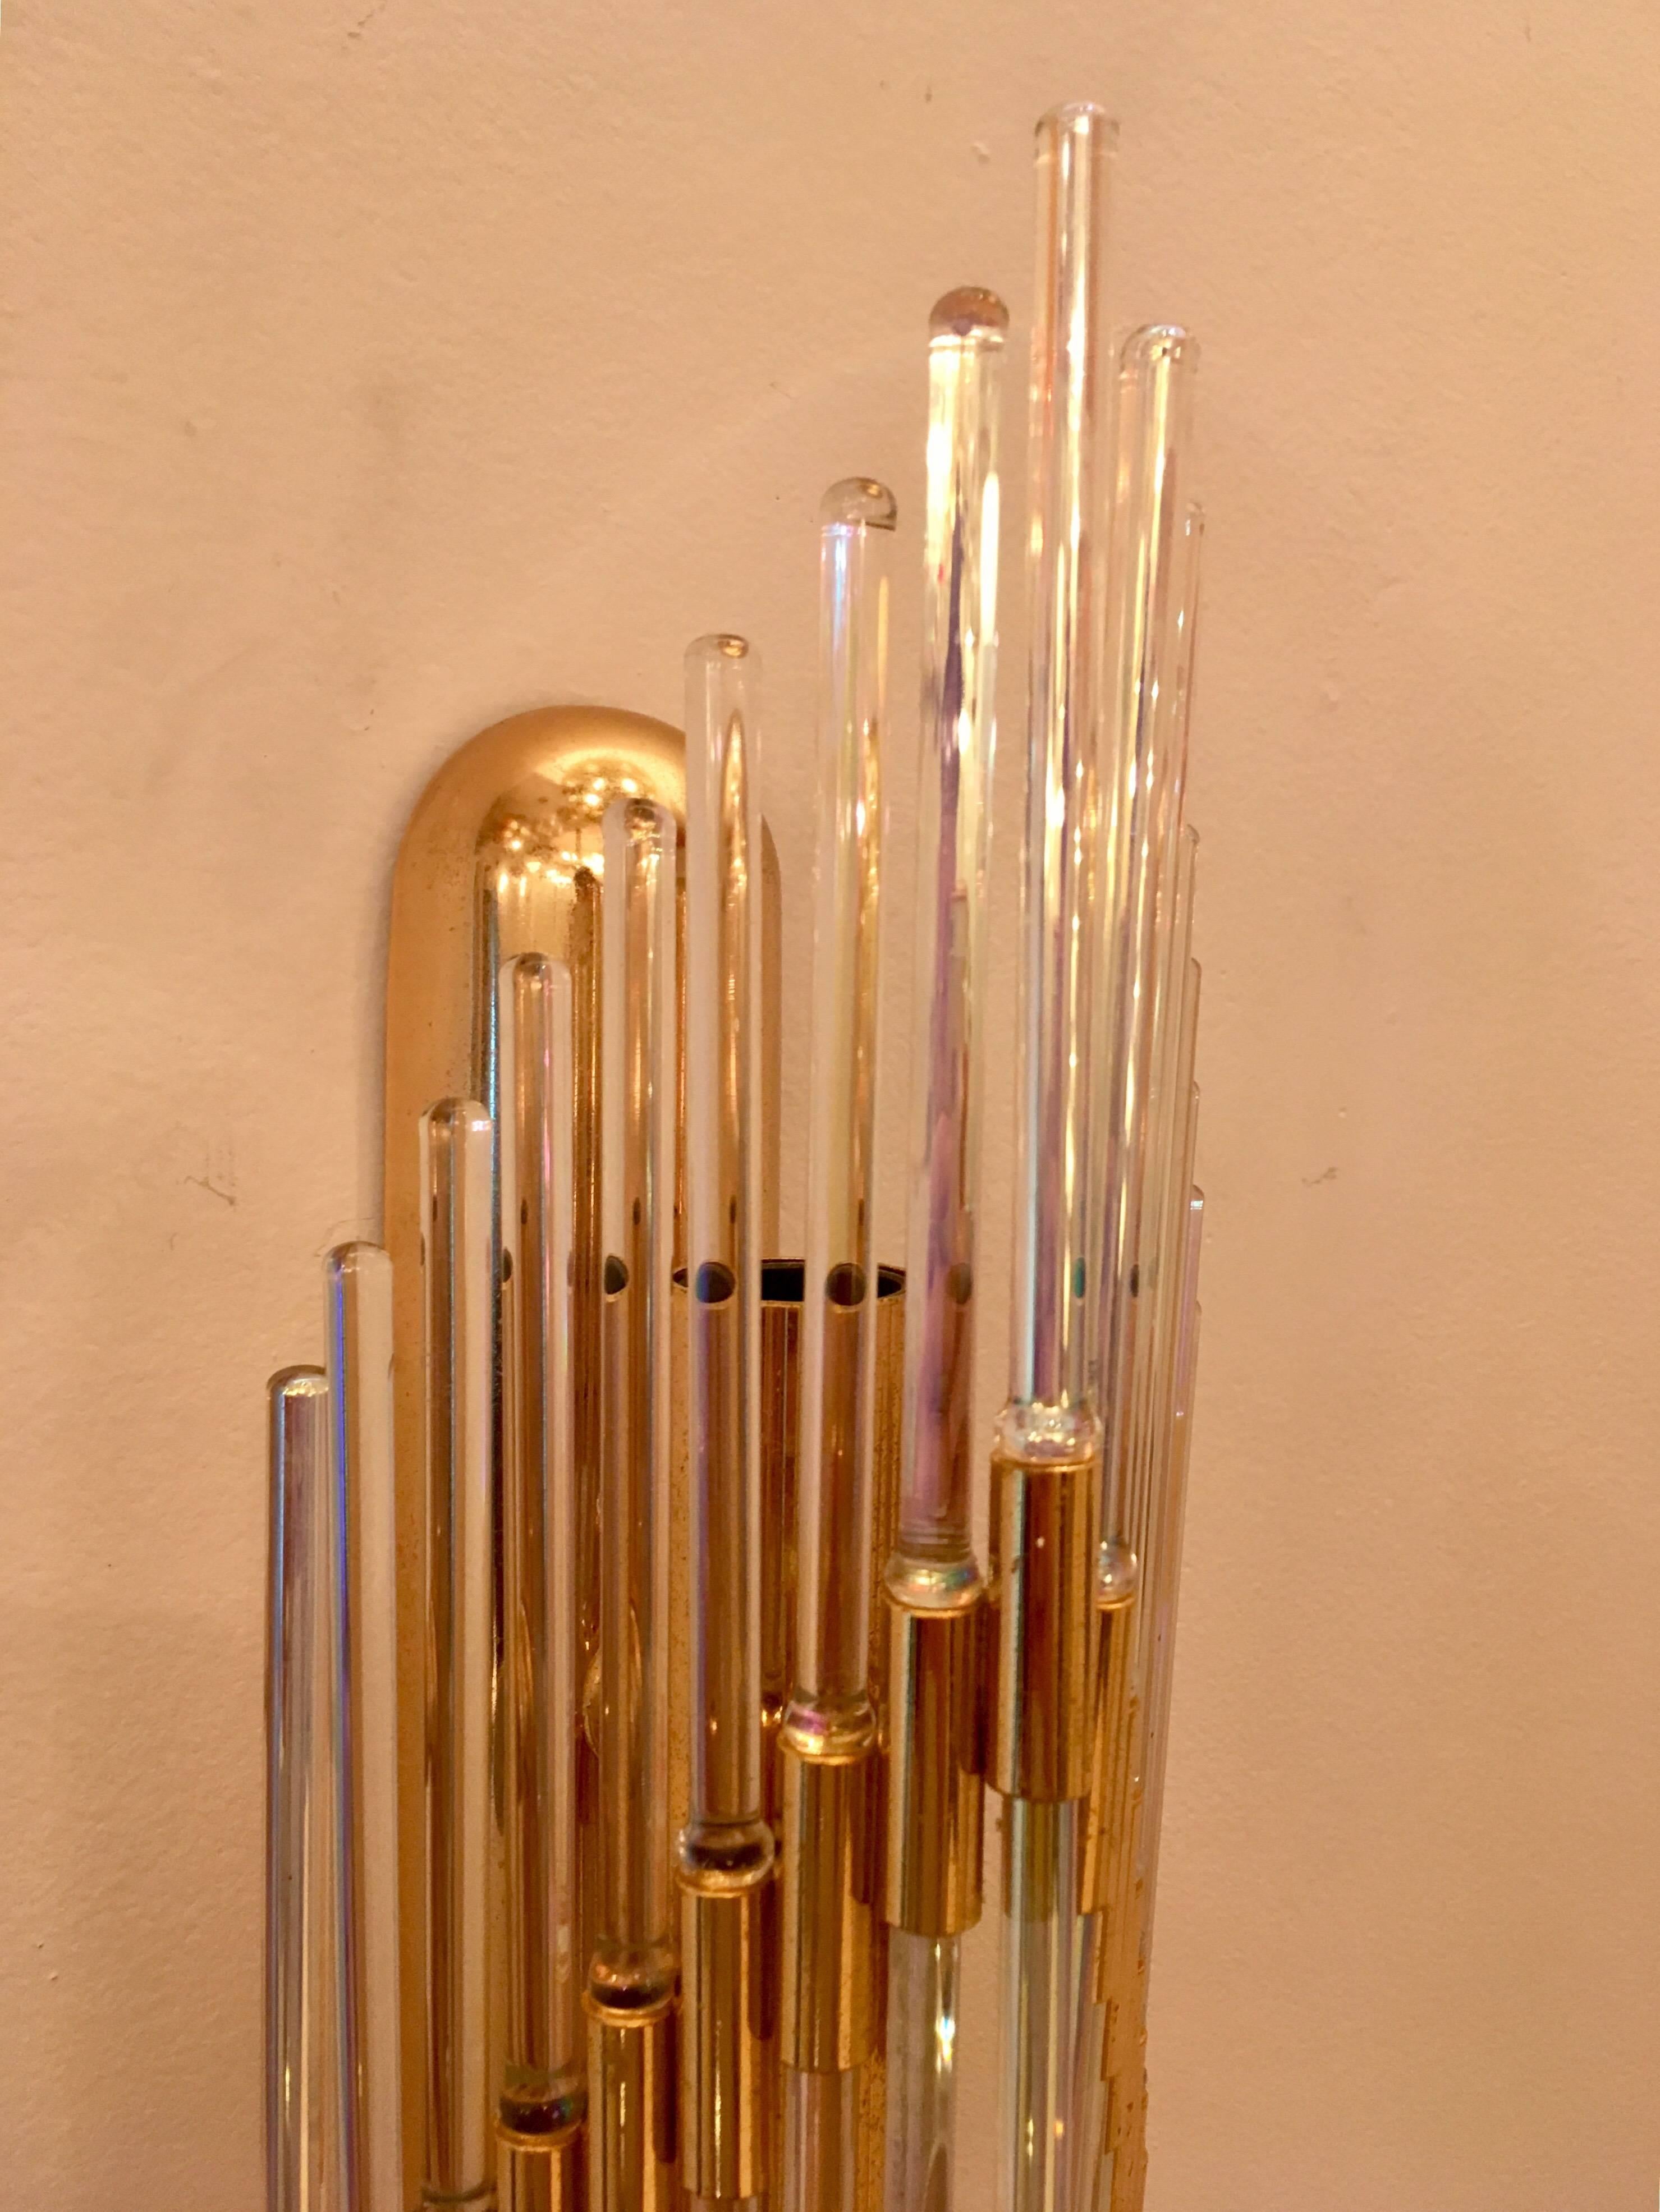 A glamorous high style 1970s pair of wall lights with golden brass fixtures and iridescent glass rod elements which twinkle with rainbow coloring. Made by the famed Italian lighting company, Sciolari. Newly Rewired.